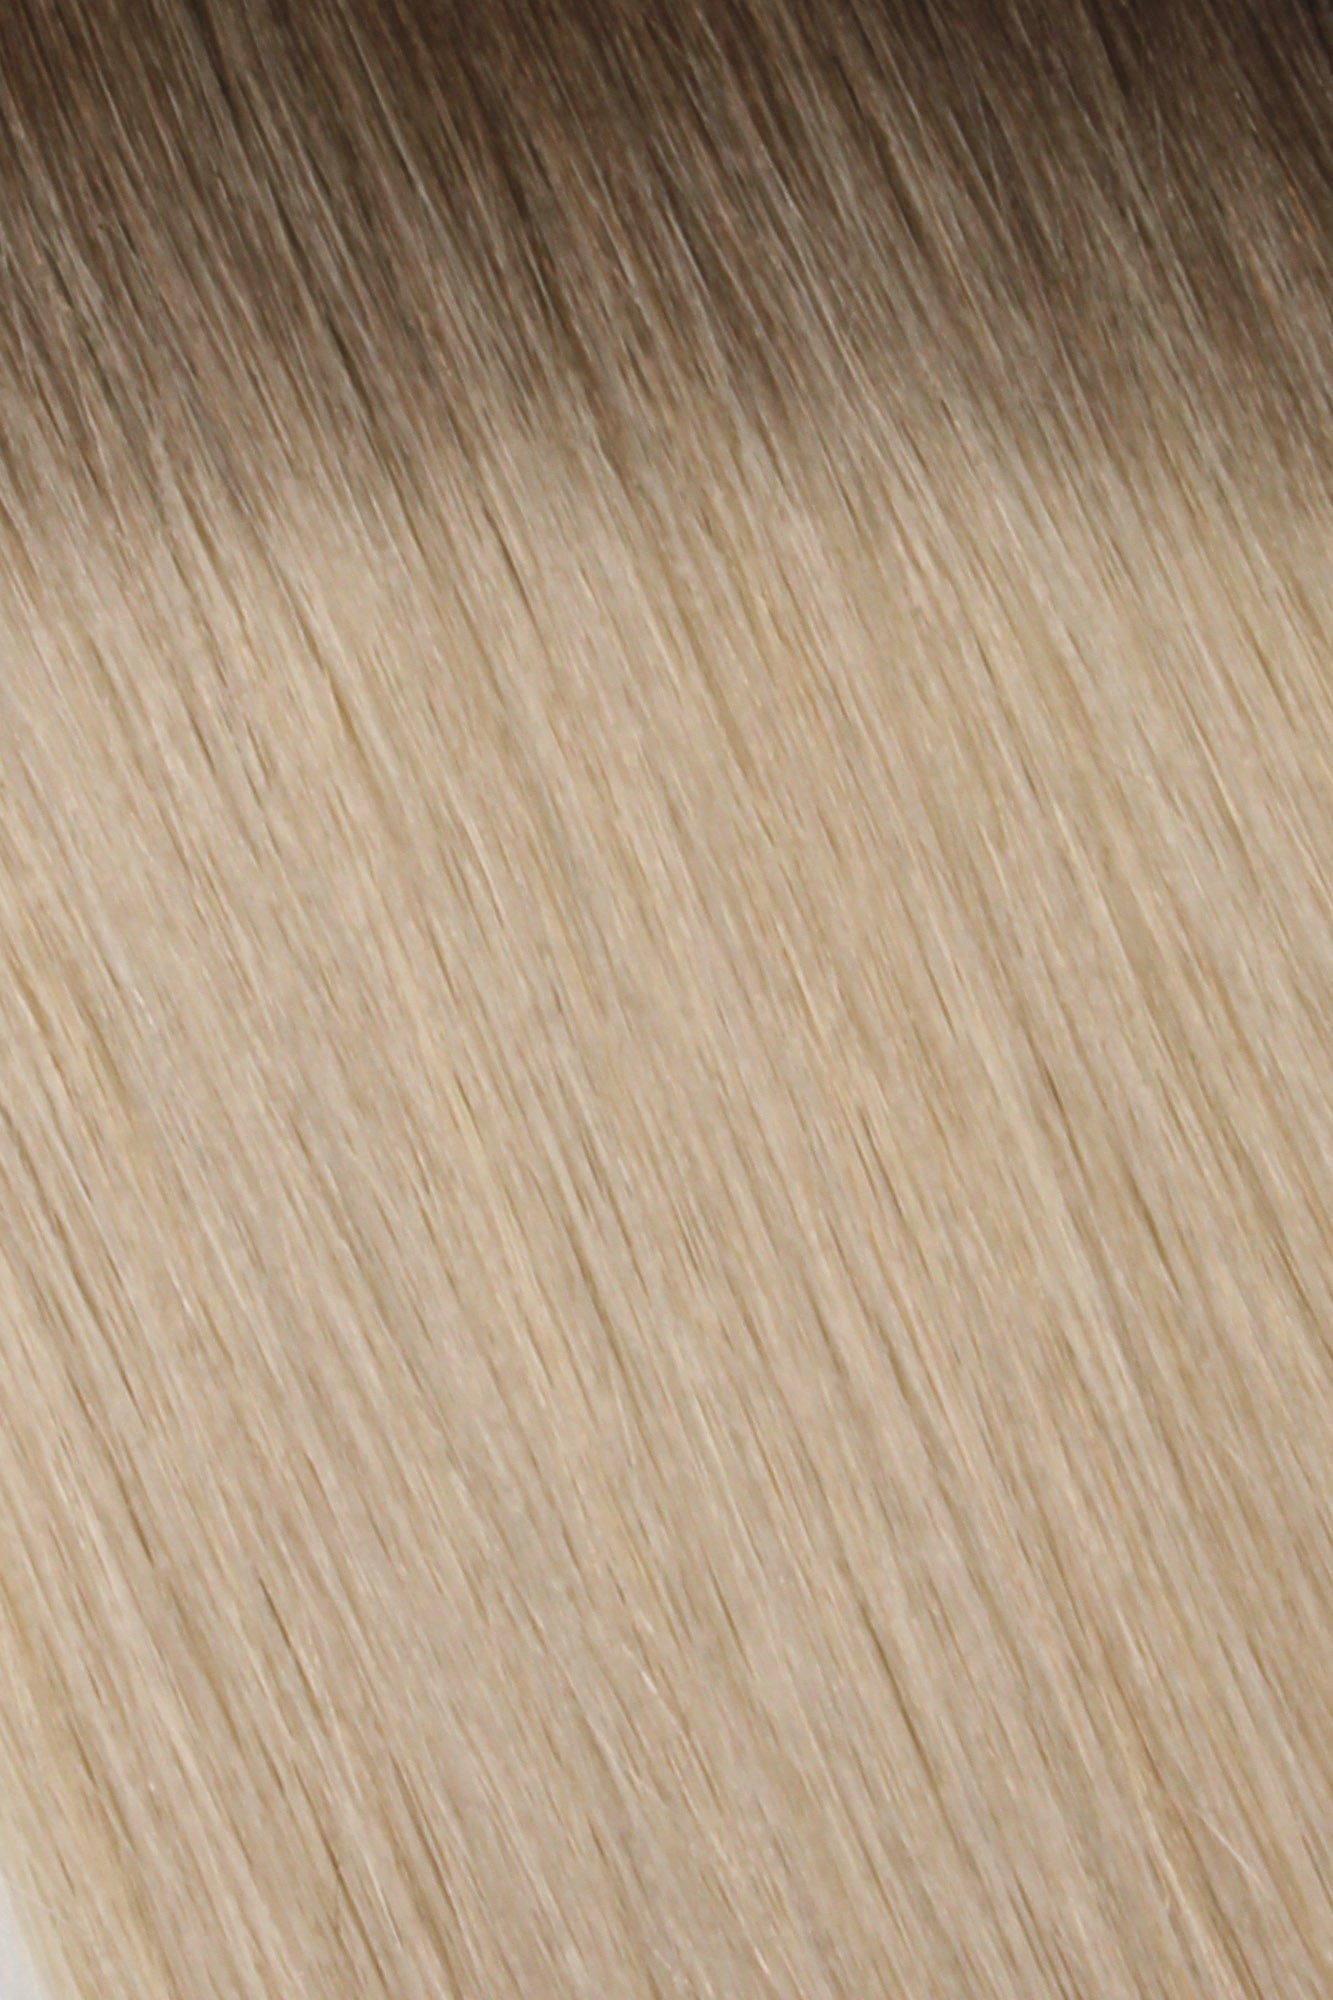 SEAMLESS® Flat Weft 20 Inches - SWAY Hair Extensions Rooted-Hollywood-Ash-Blonde-R5-18A-613A Natural SEAMLESS® Flat Weft 20 Inches extensions. Thin, flexible, and discreet. 100% Double Drawn Remy Human Hair. Versatile and reusable